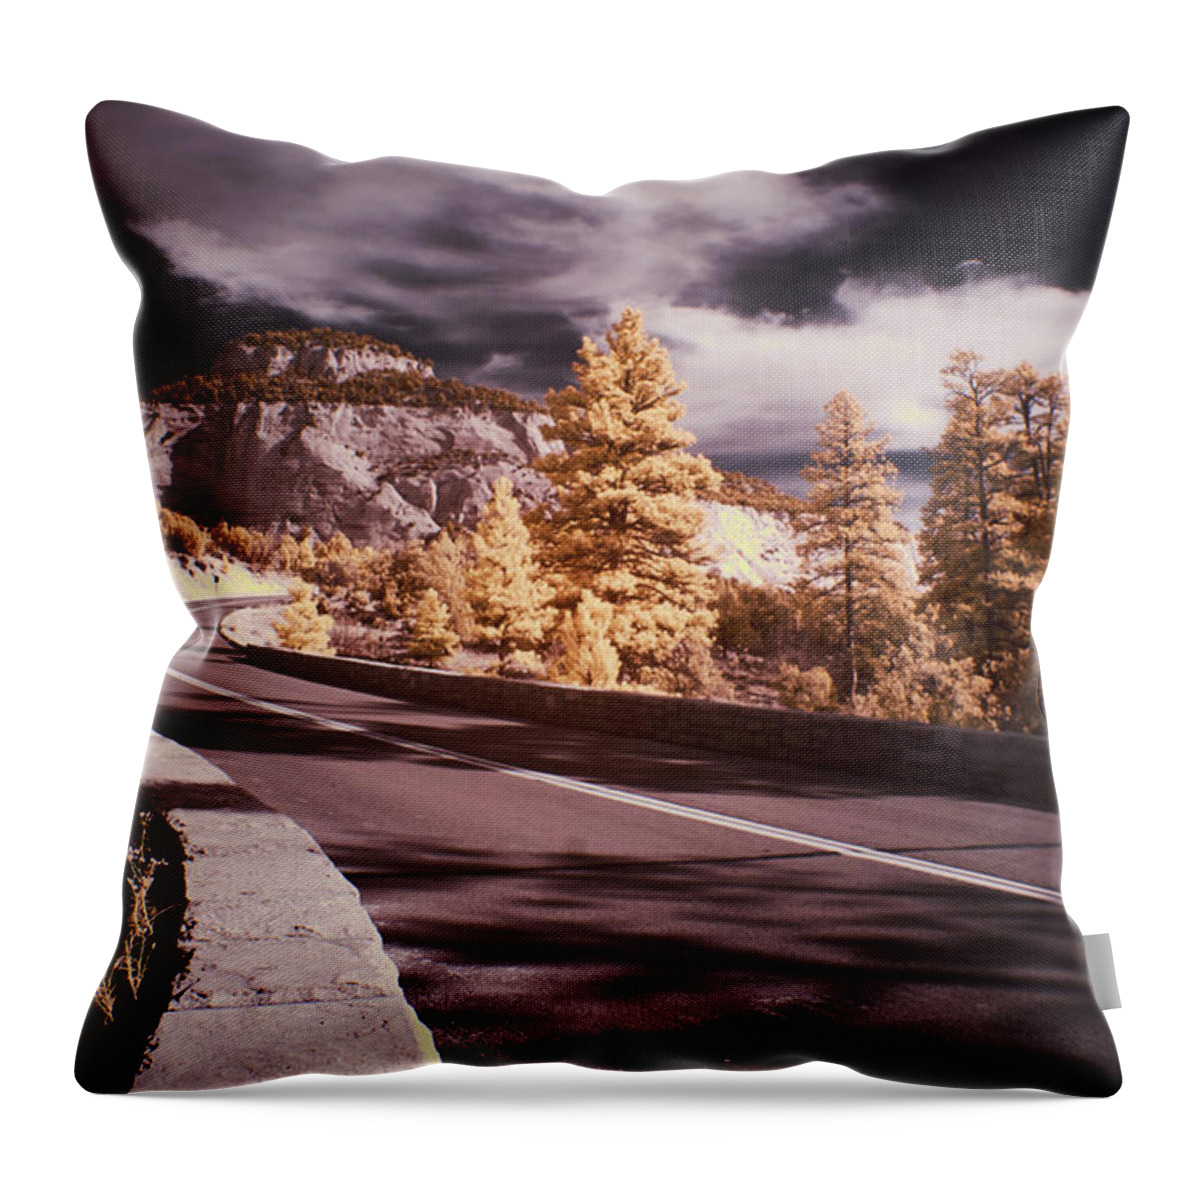 Zion Throw Pillow featuring the photograph Zion by Jim Cook